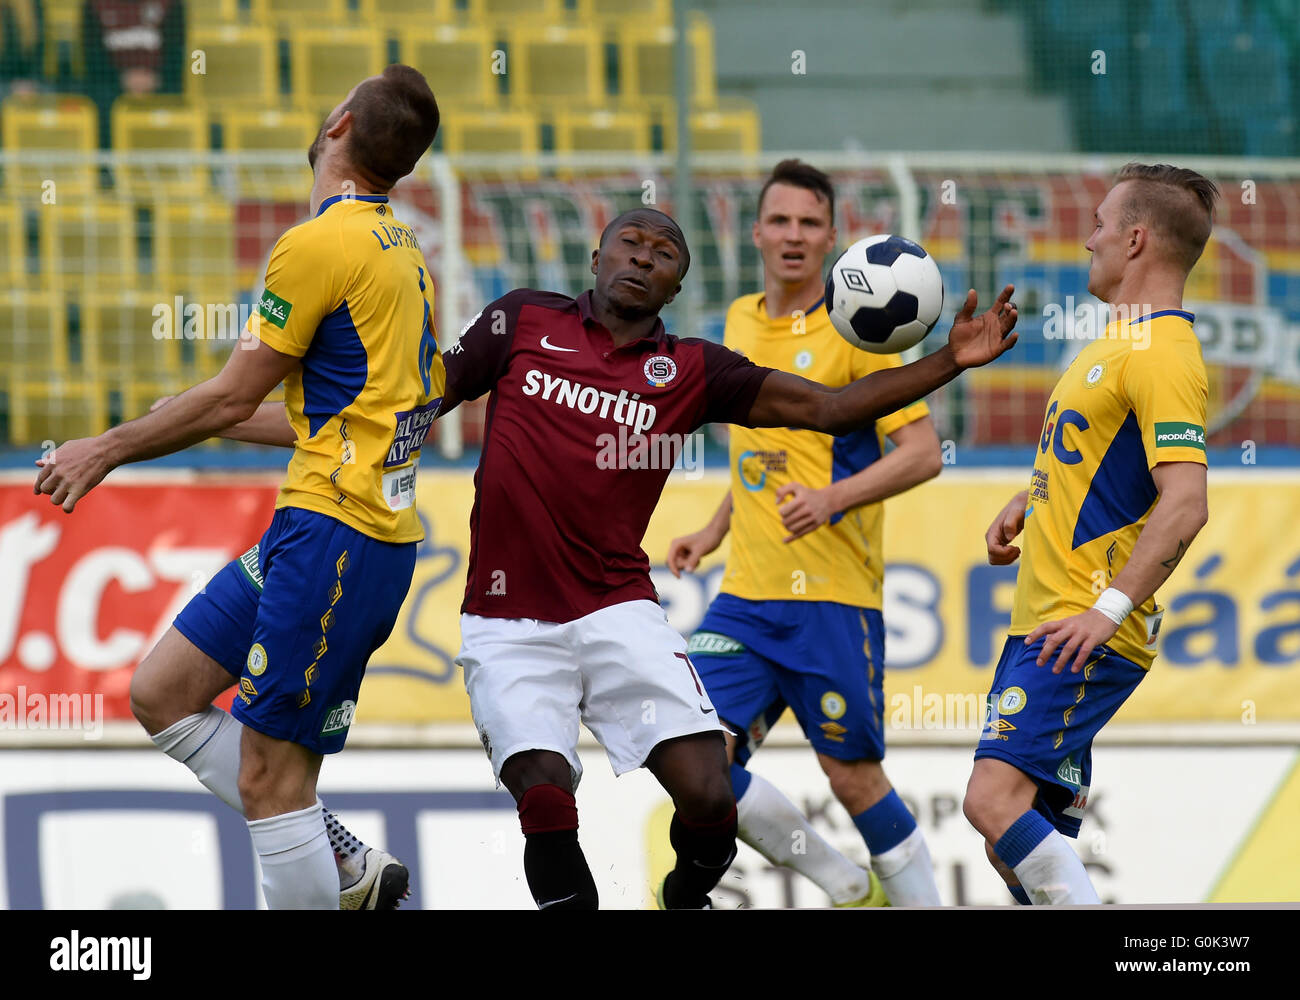 Michael Luftner of Teplice, from left, Kehinde Fatai of Sparta, and Michal  Jerabek and Jakub Hora of Teplice in action during the Czech football  league soccer match FK Teplice vs AC Sparta